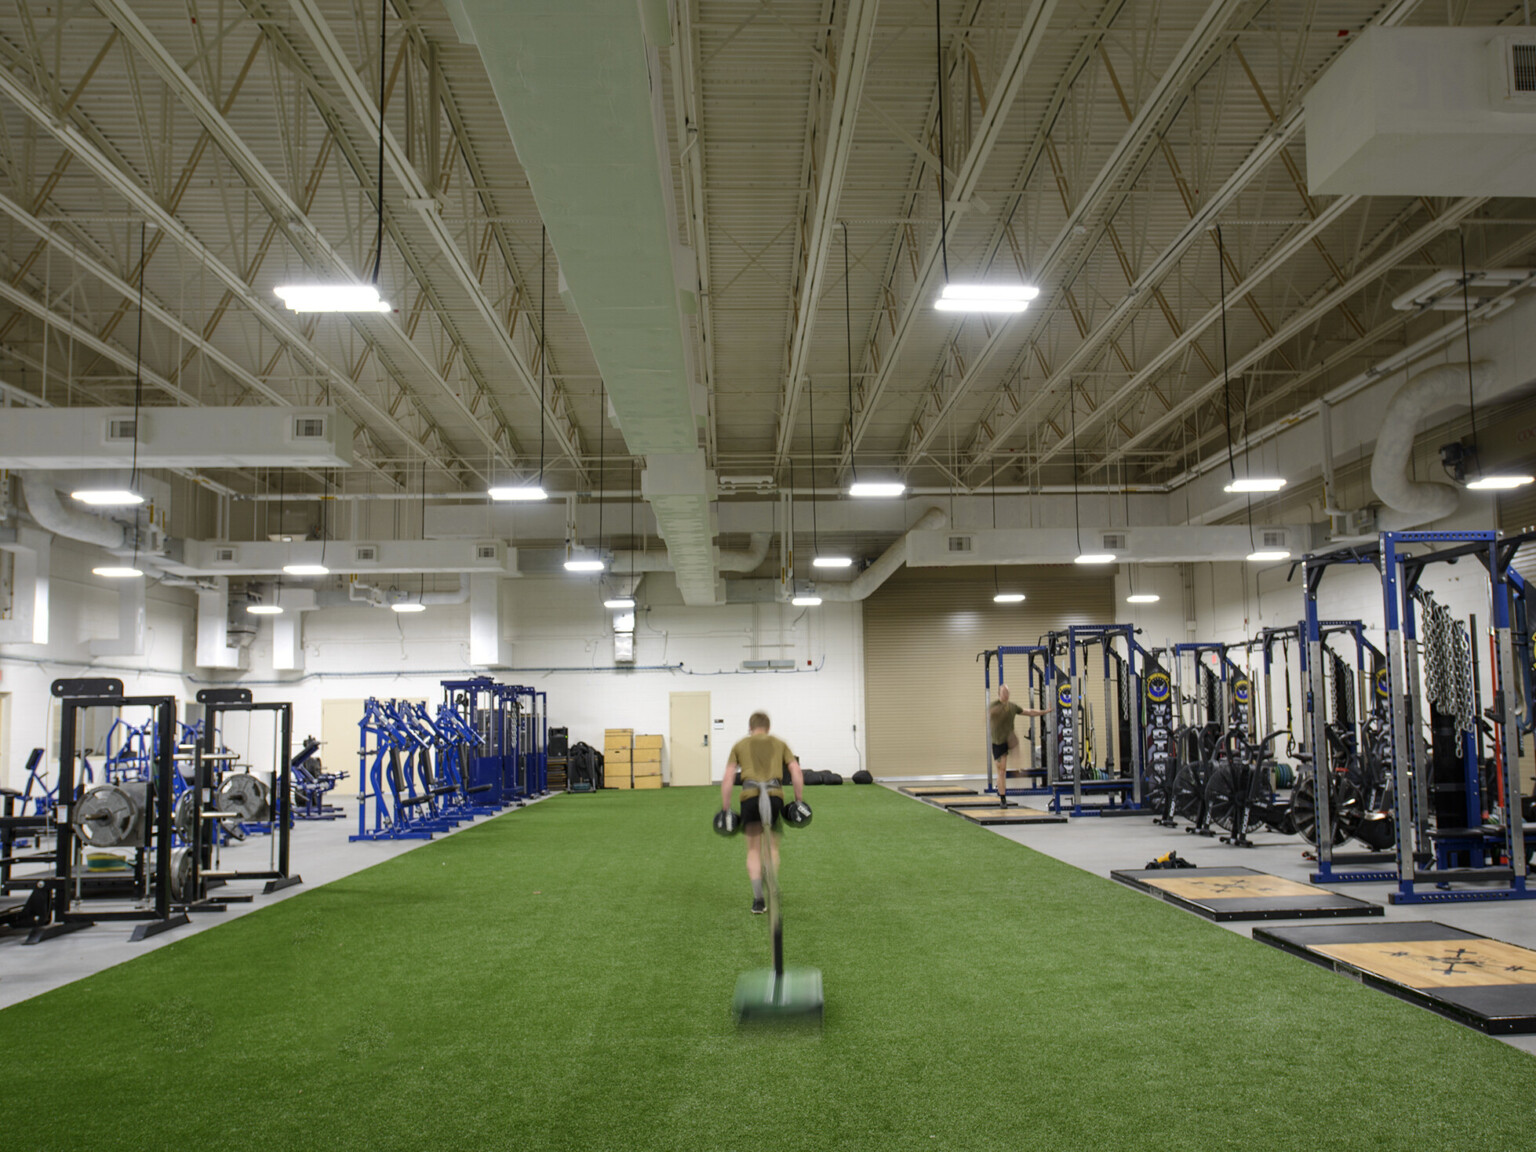 The Human Performance Training Center includes a double-high training space, state of the art weight equipment, therapy areas, a classroom, and administrative offices